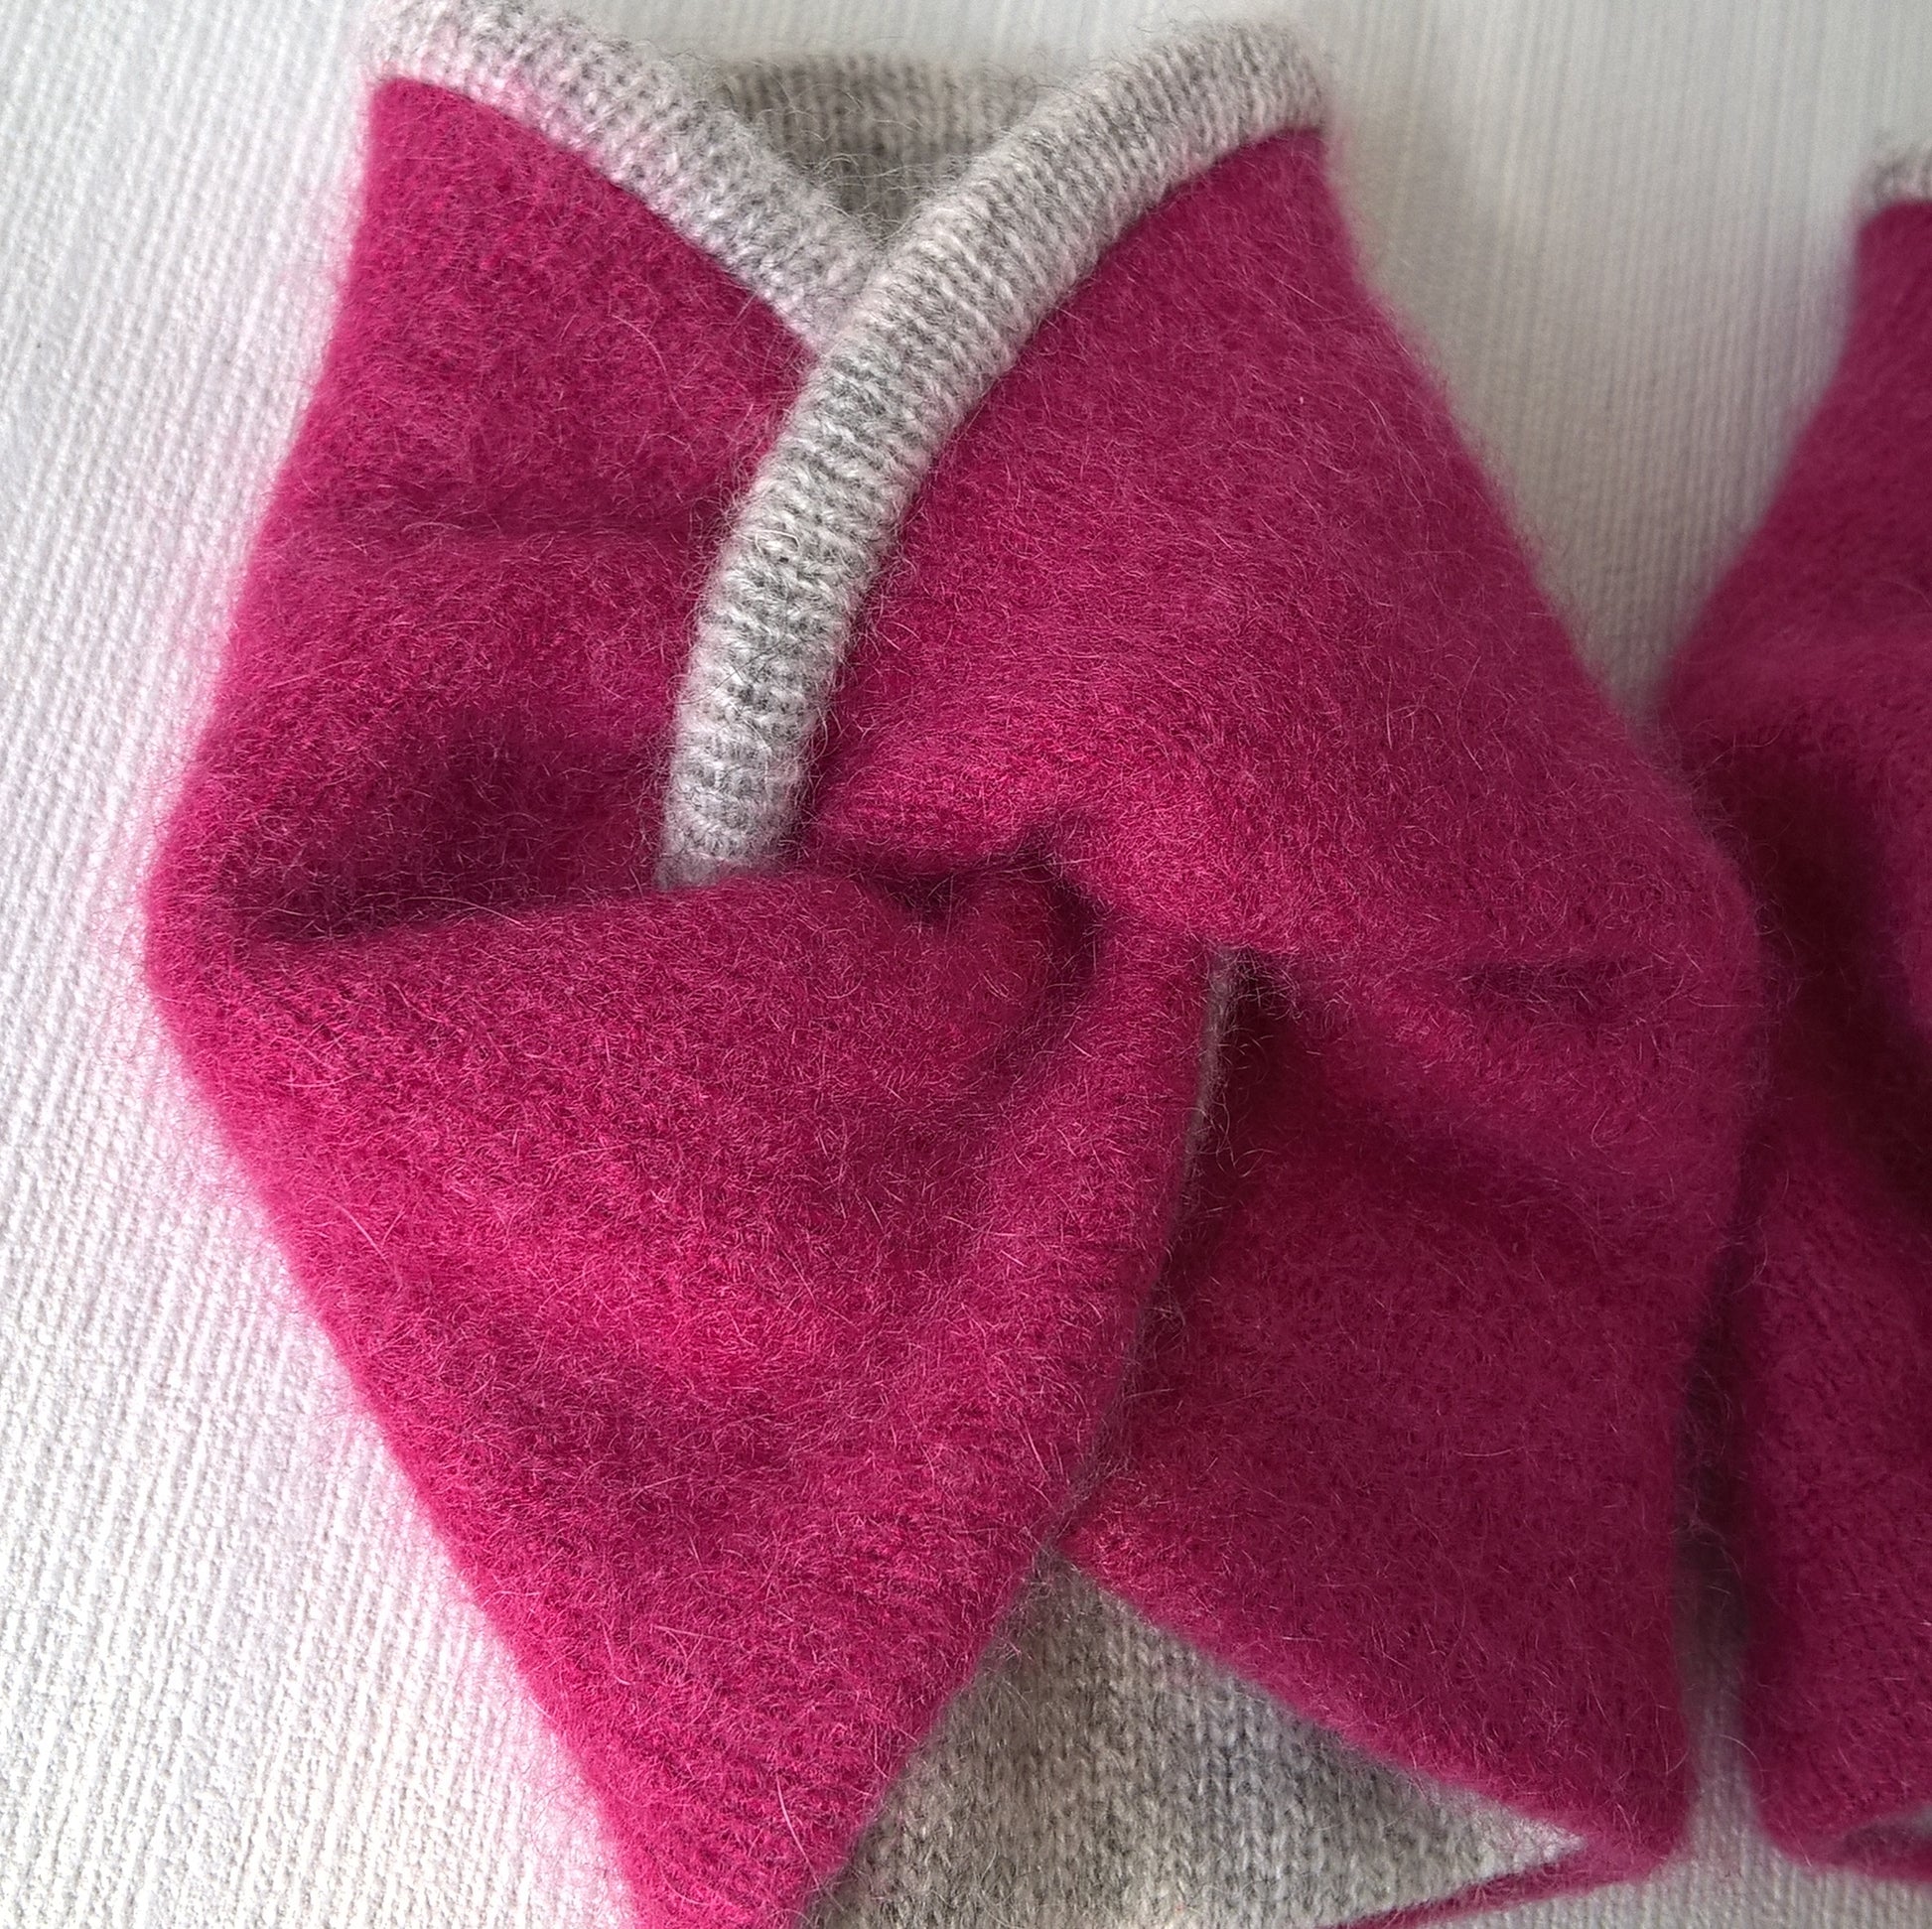 The upcycled raspberry pink cashmere is felted and lined with a fine knitted grey cashmere